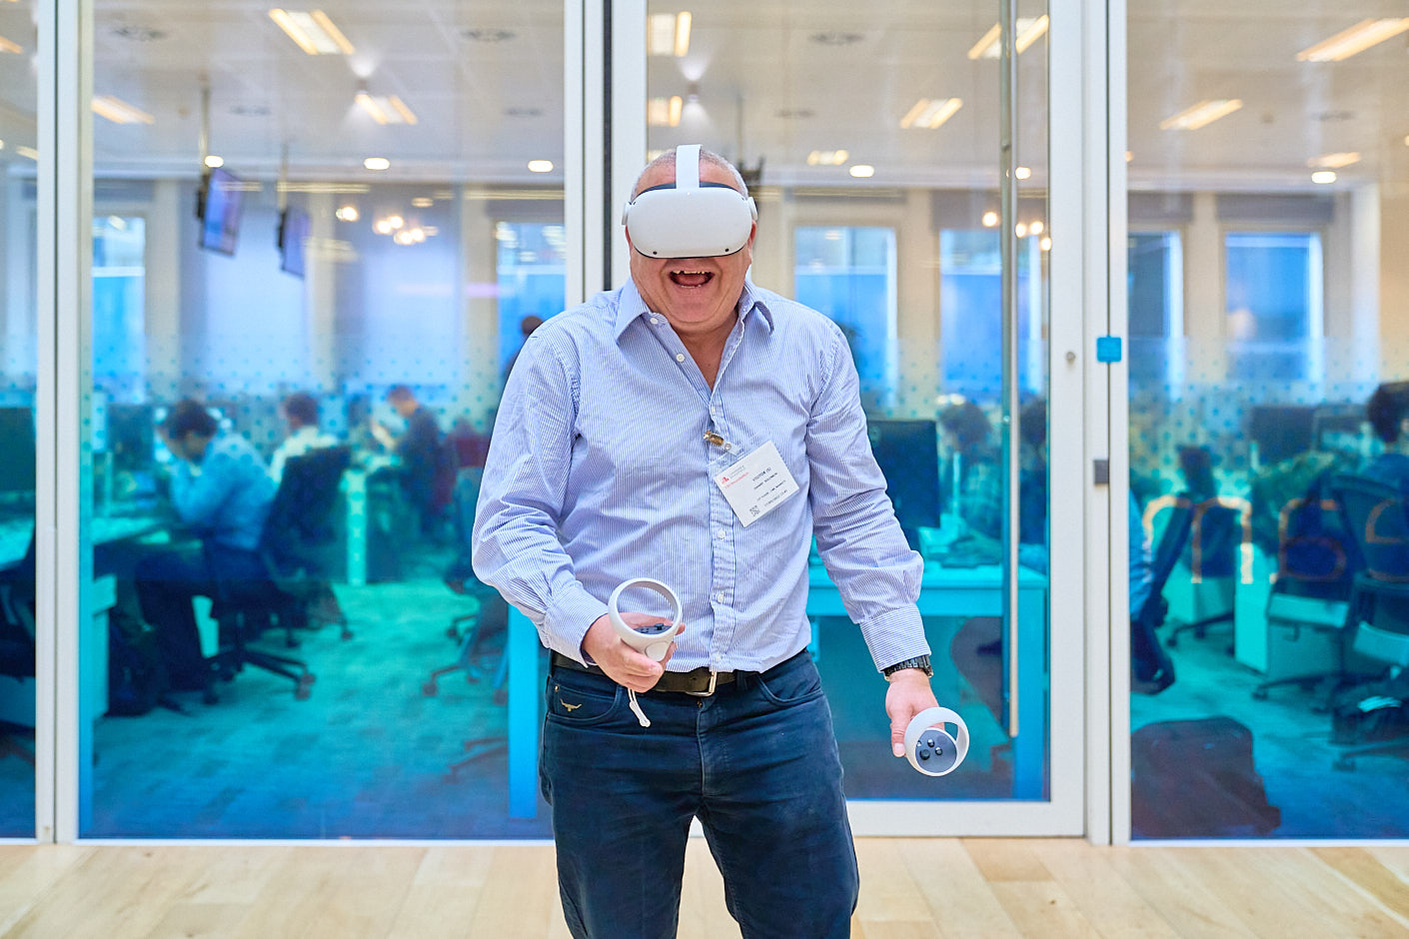 Man at a virtual reality educational conference enjoying a demo, with investment bankers' offices in the background.